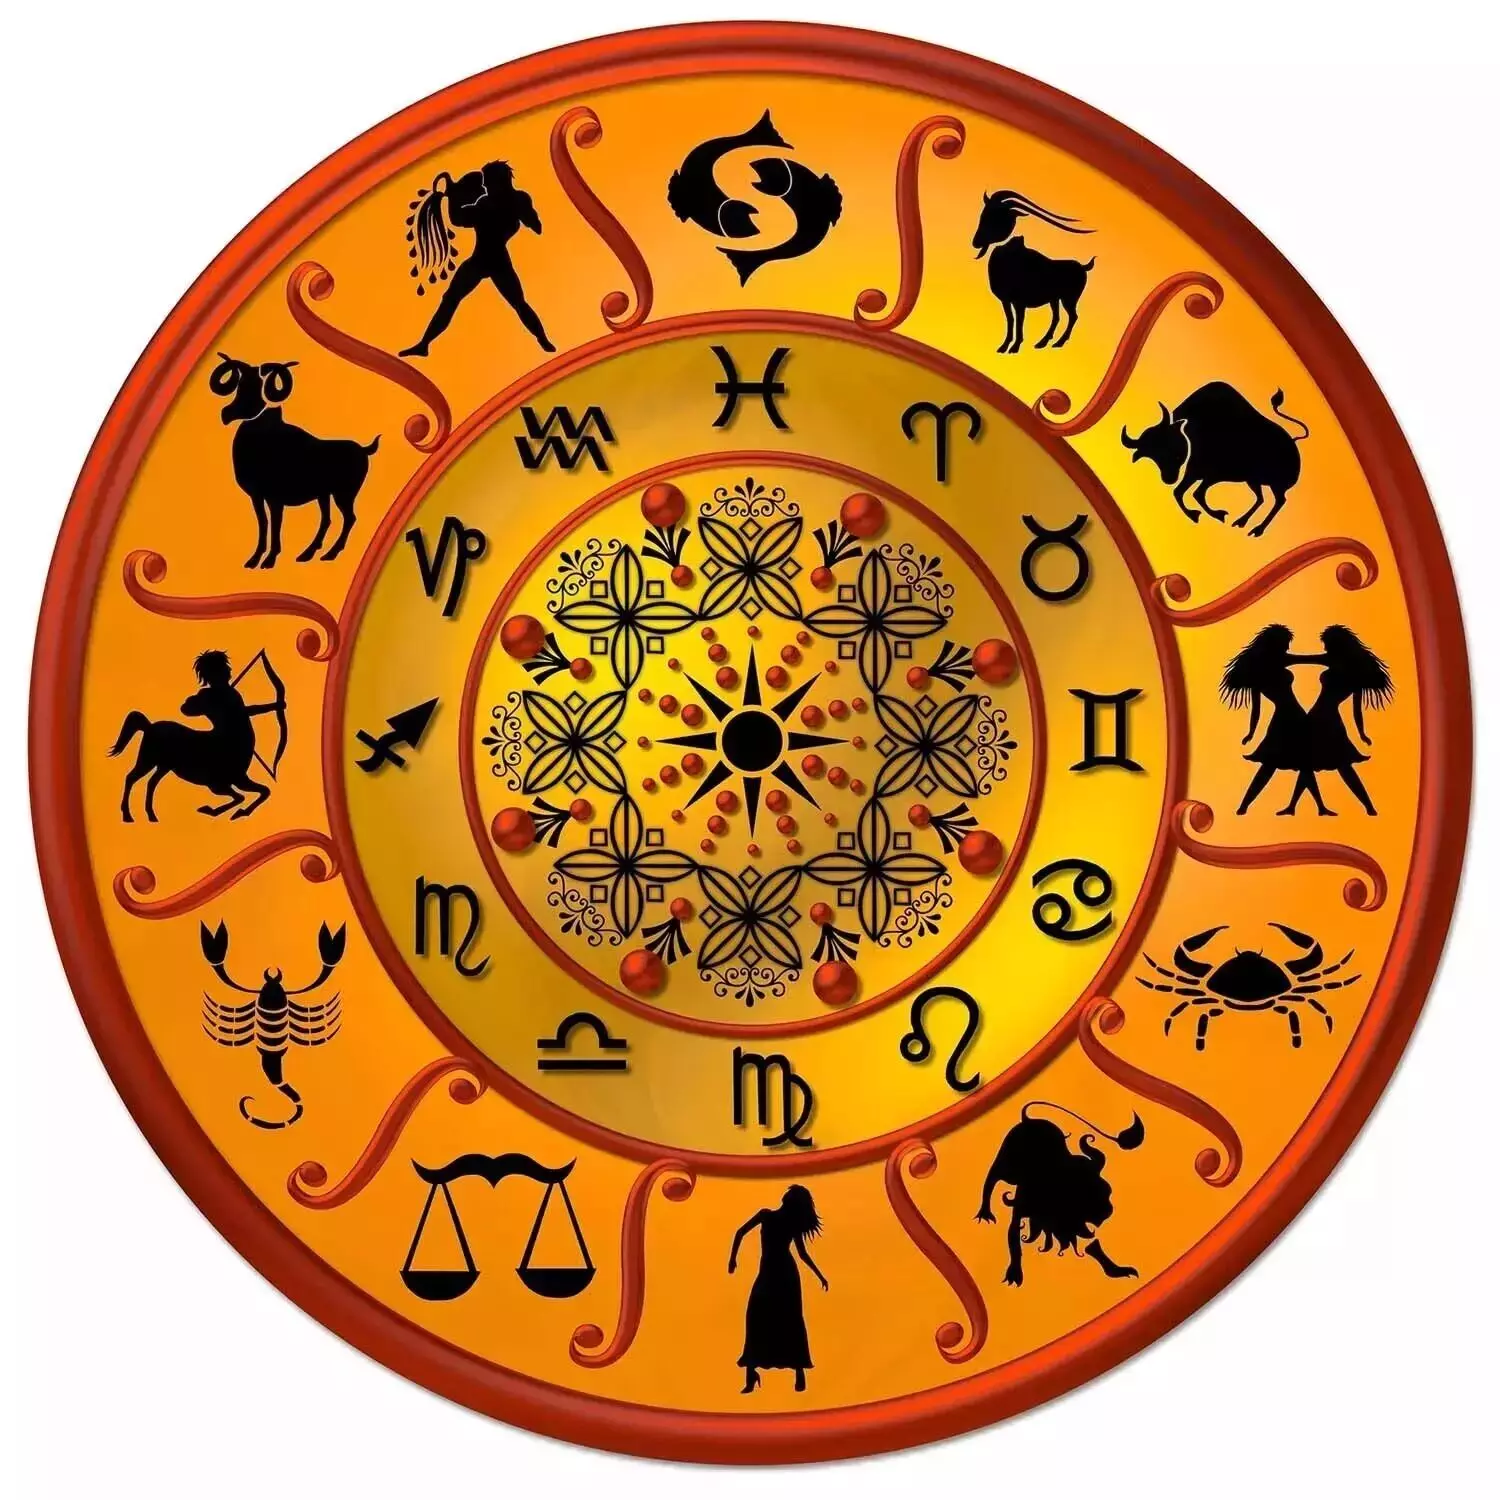 06 June  – Know your todays horoscope